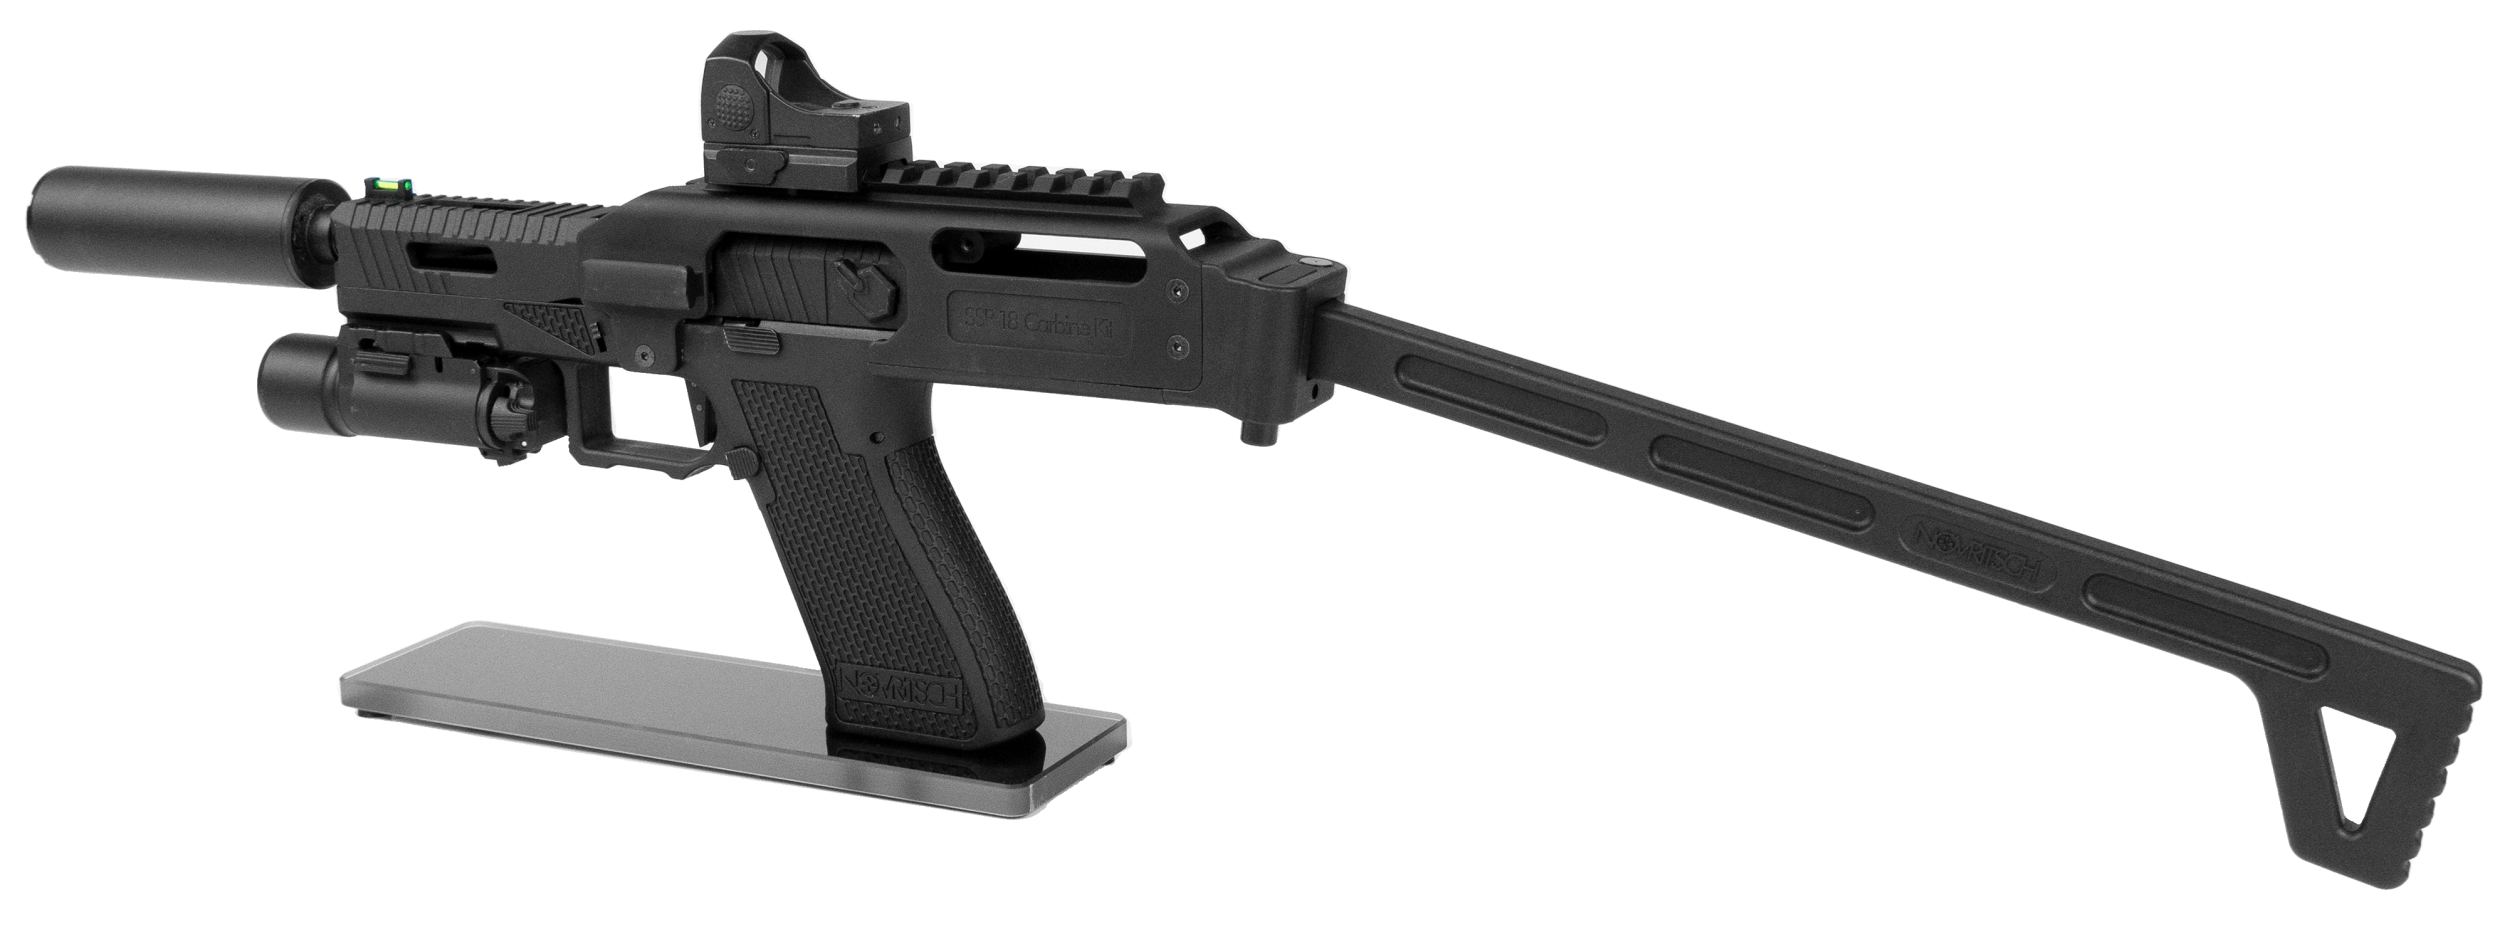 SSP18-Carbine-Kit-Sidearm-on-another-level_2.png